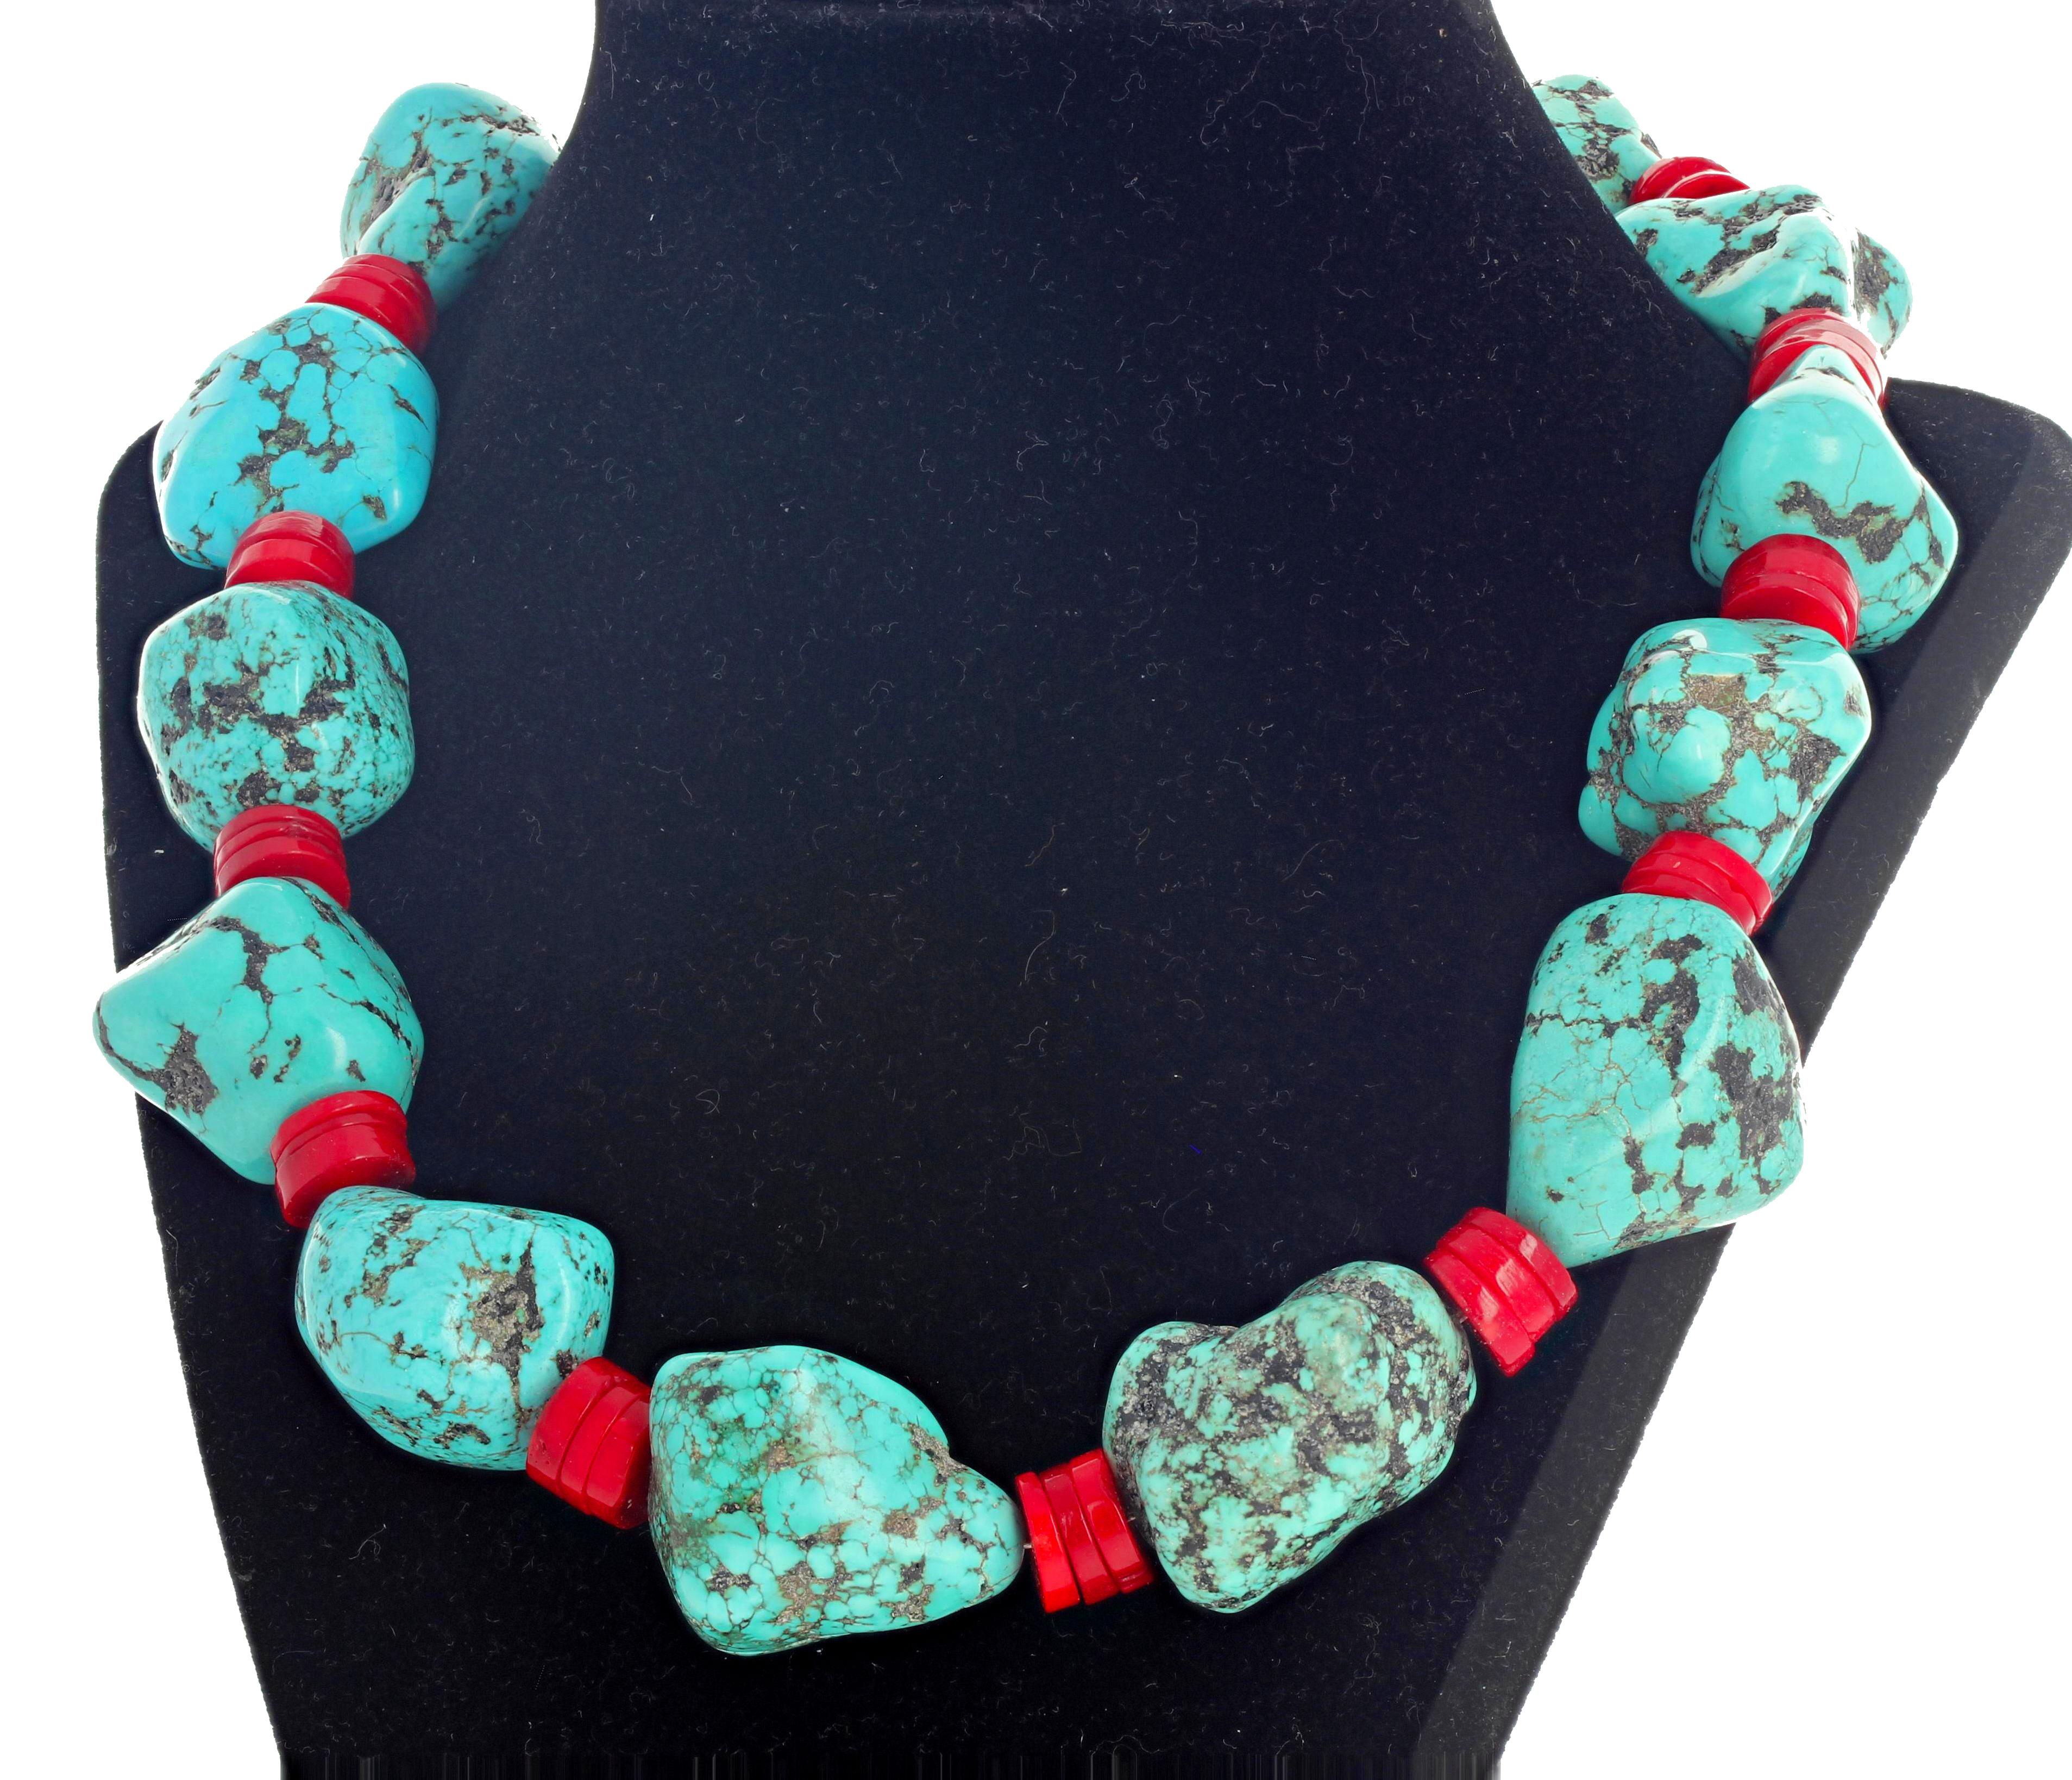 Blue and blue-green Howlite Turquoise (largest approximately 30 mm x 22 mm) enhanced with sliced rondels of natural red Coral set in a 19.5 inch long necklace with silver hook clasp.   If you wish faster delivery on your purchase choose UPS to ship